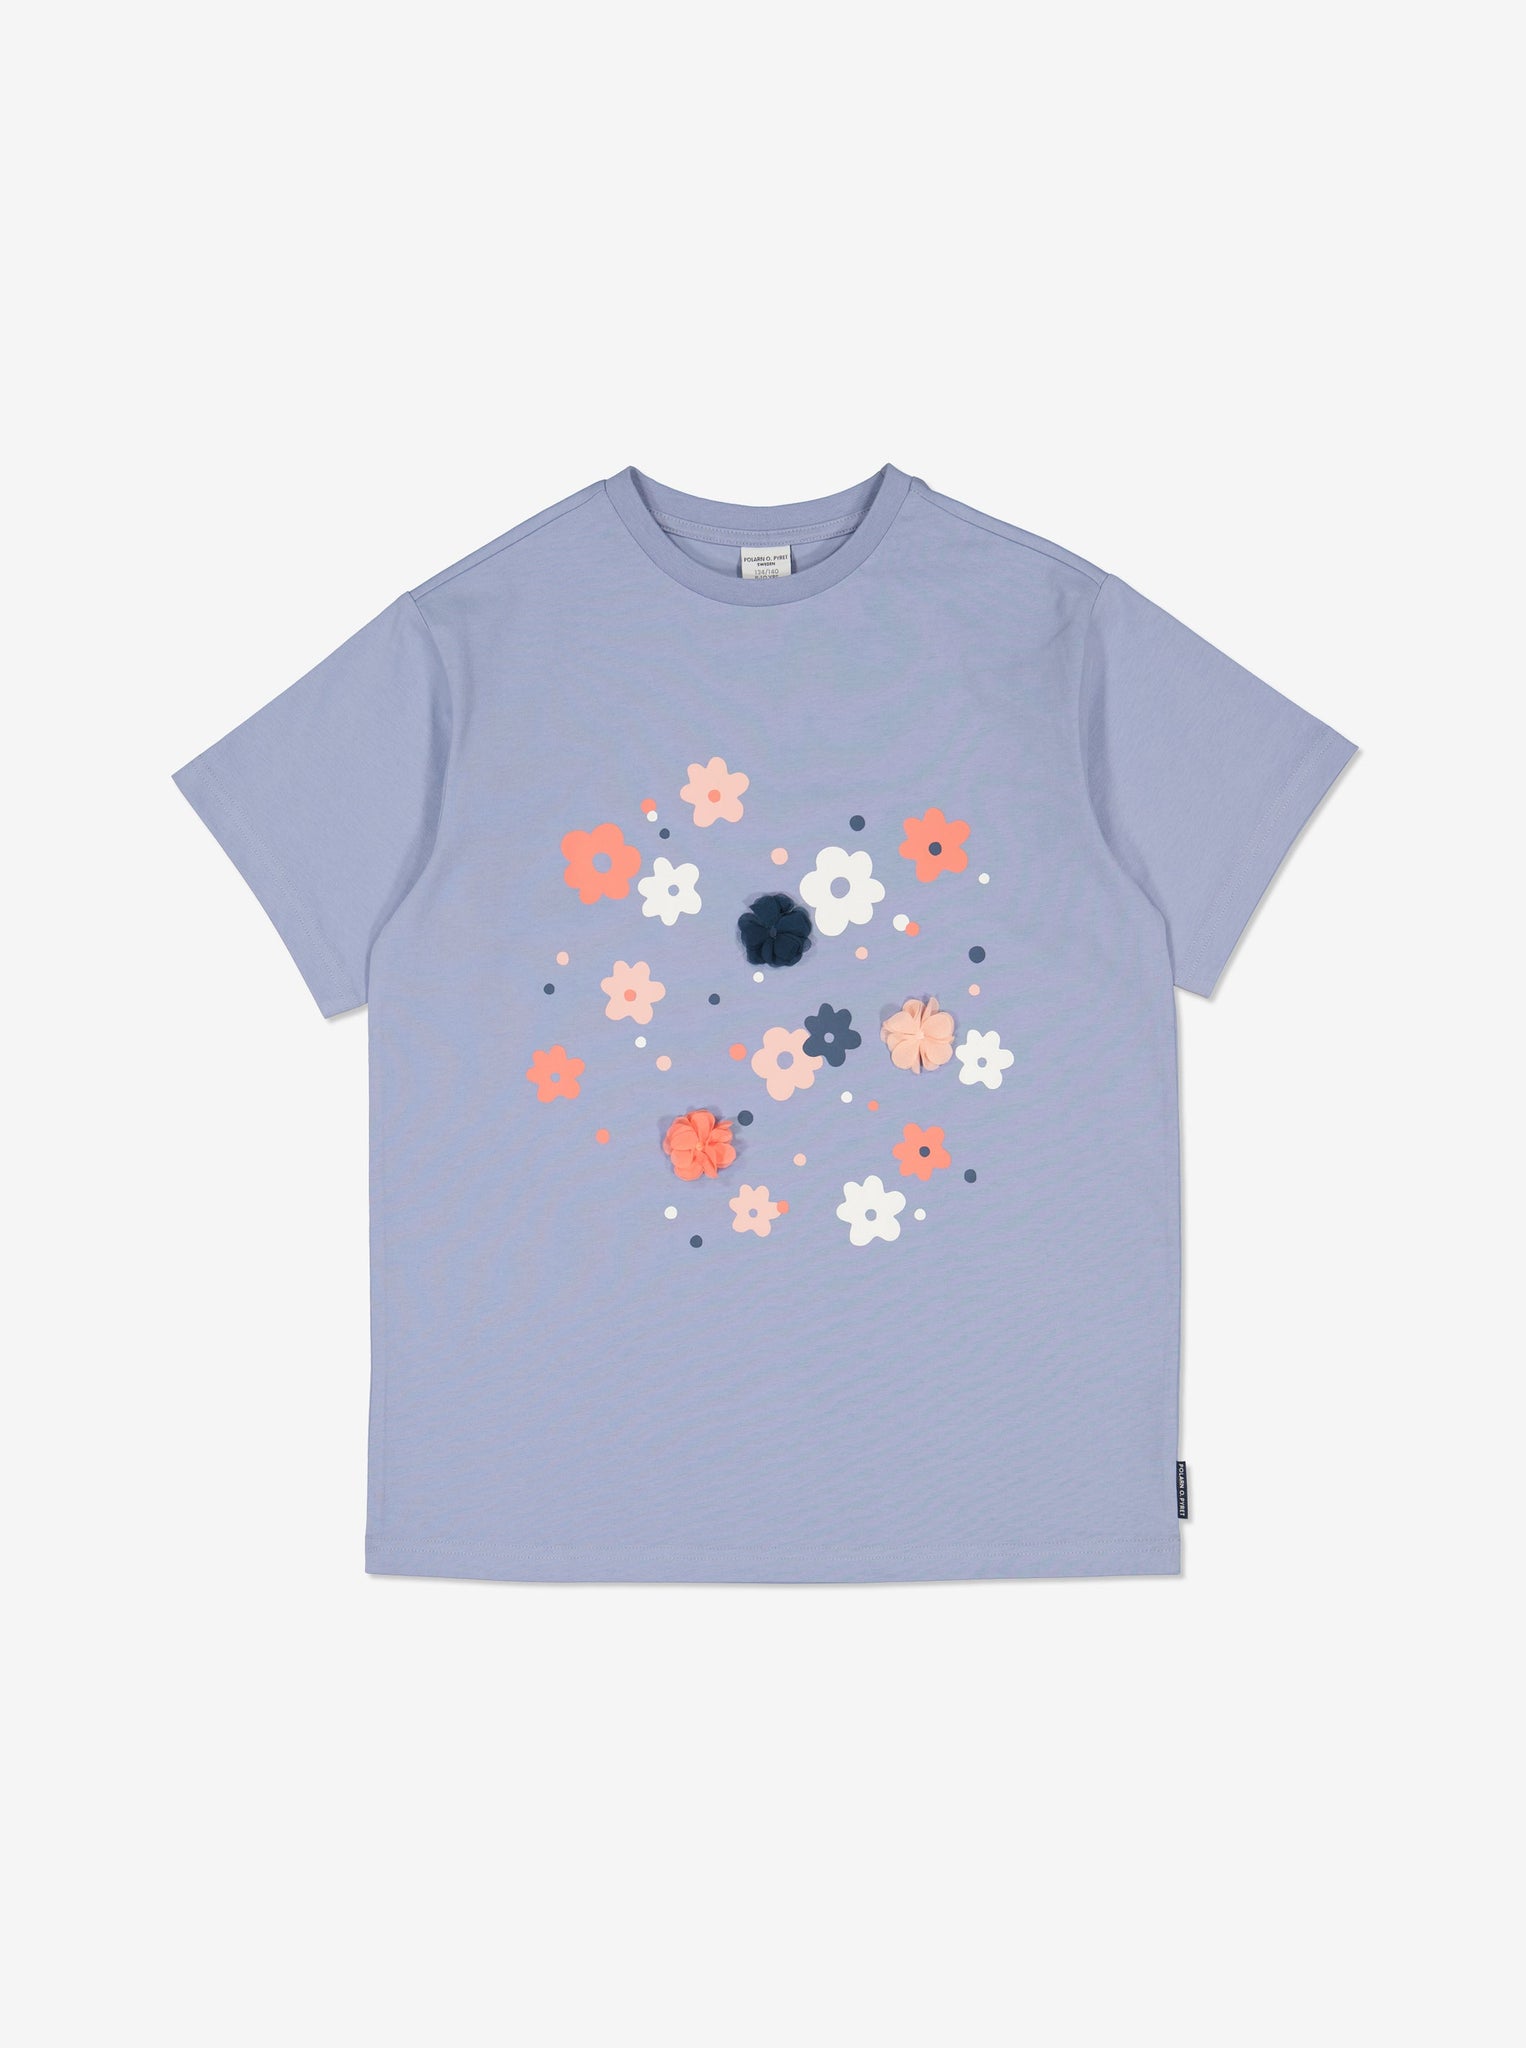 Organic Cotton Floral Kids T-Shirt from Polarn O. Pyret Kidswear. Ethically made and sustainably sourced materials.